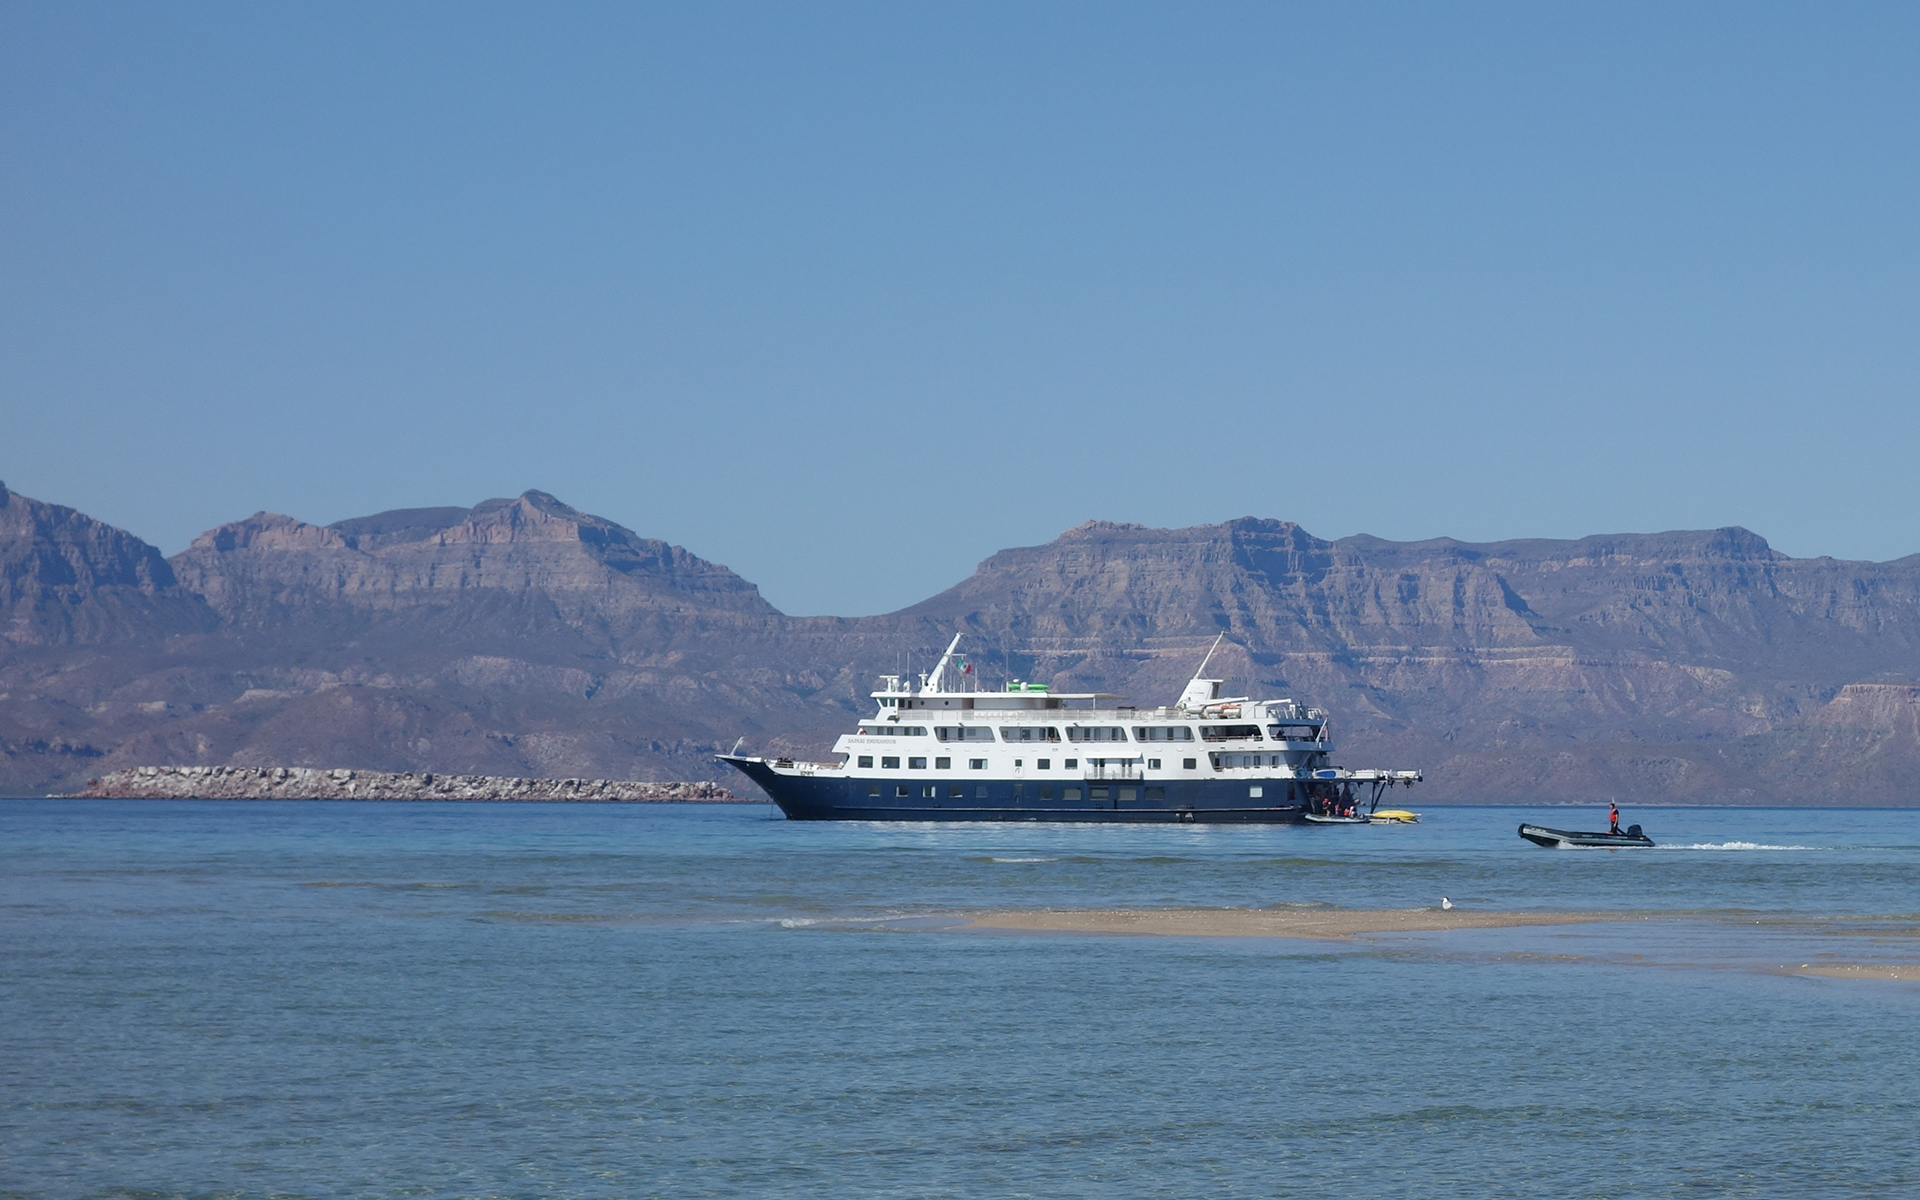 A white and blue small ship cruise seen with a zodiac behind it cruising toward the ship, with tall tan shoreline mountains behind in the distance